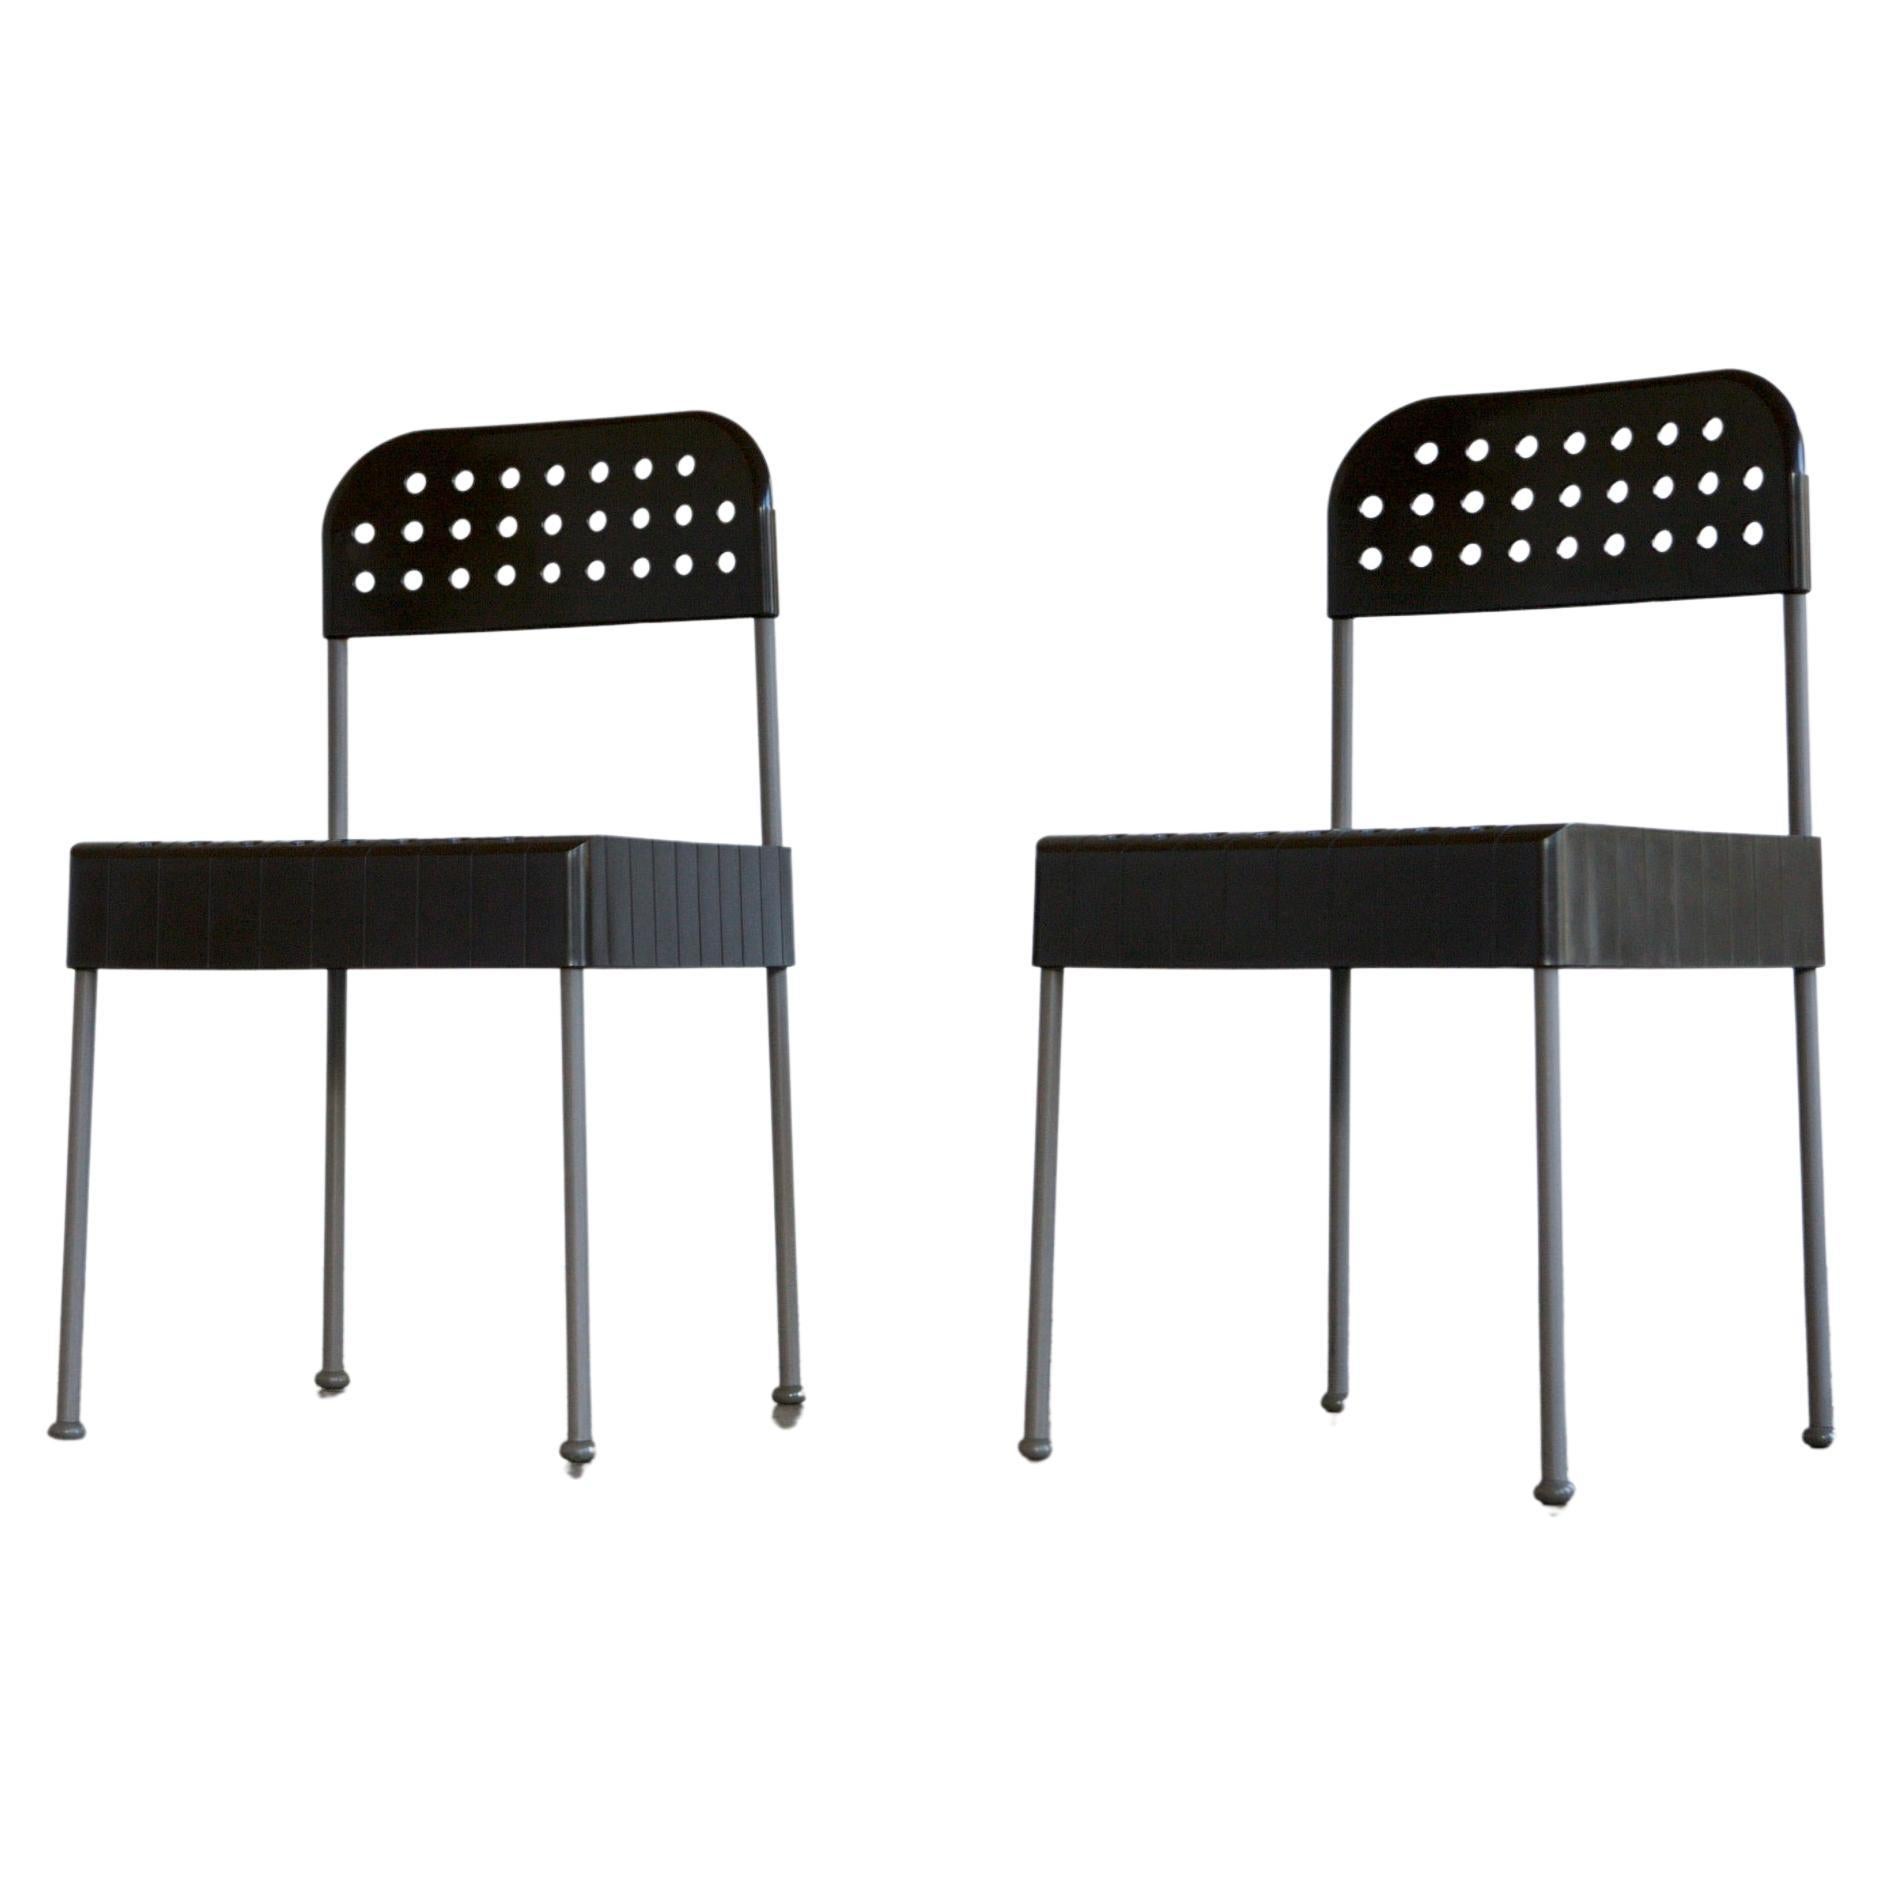 Enzo Mari Bx Chairs for Castelli For Sale